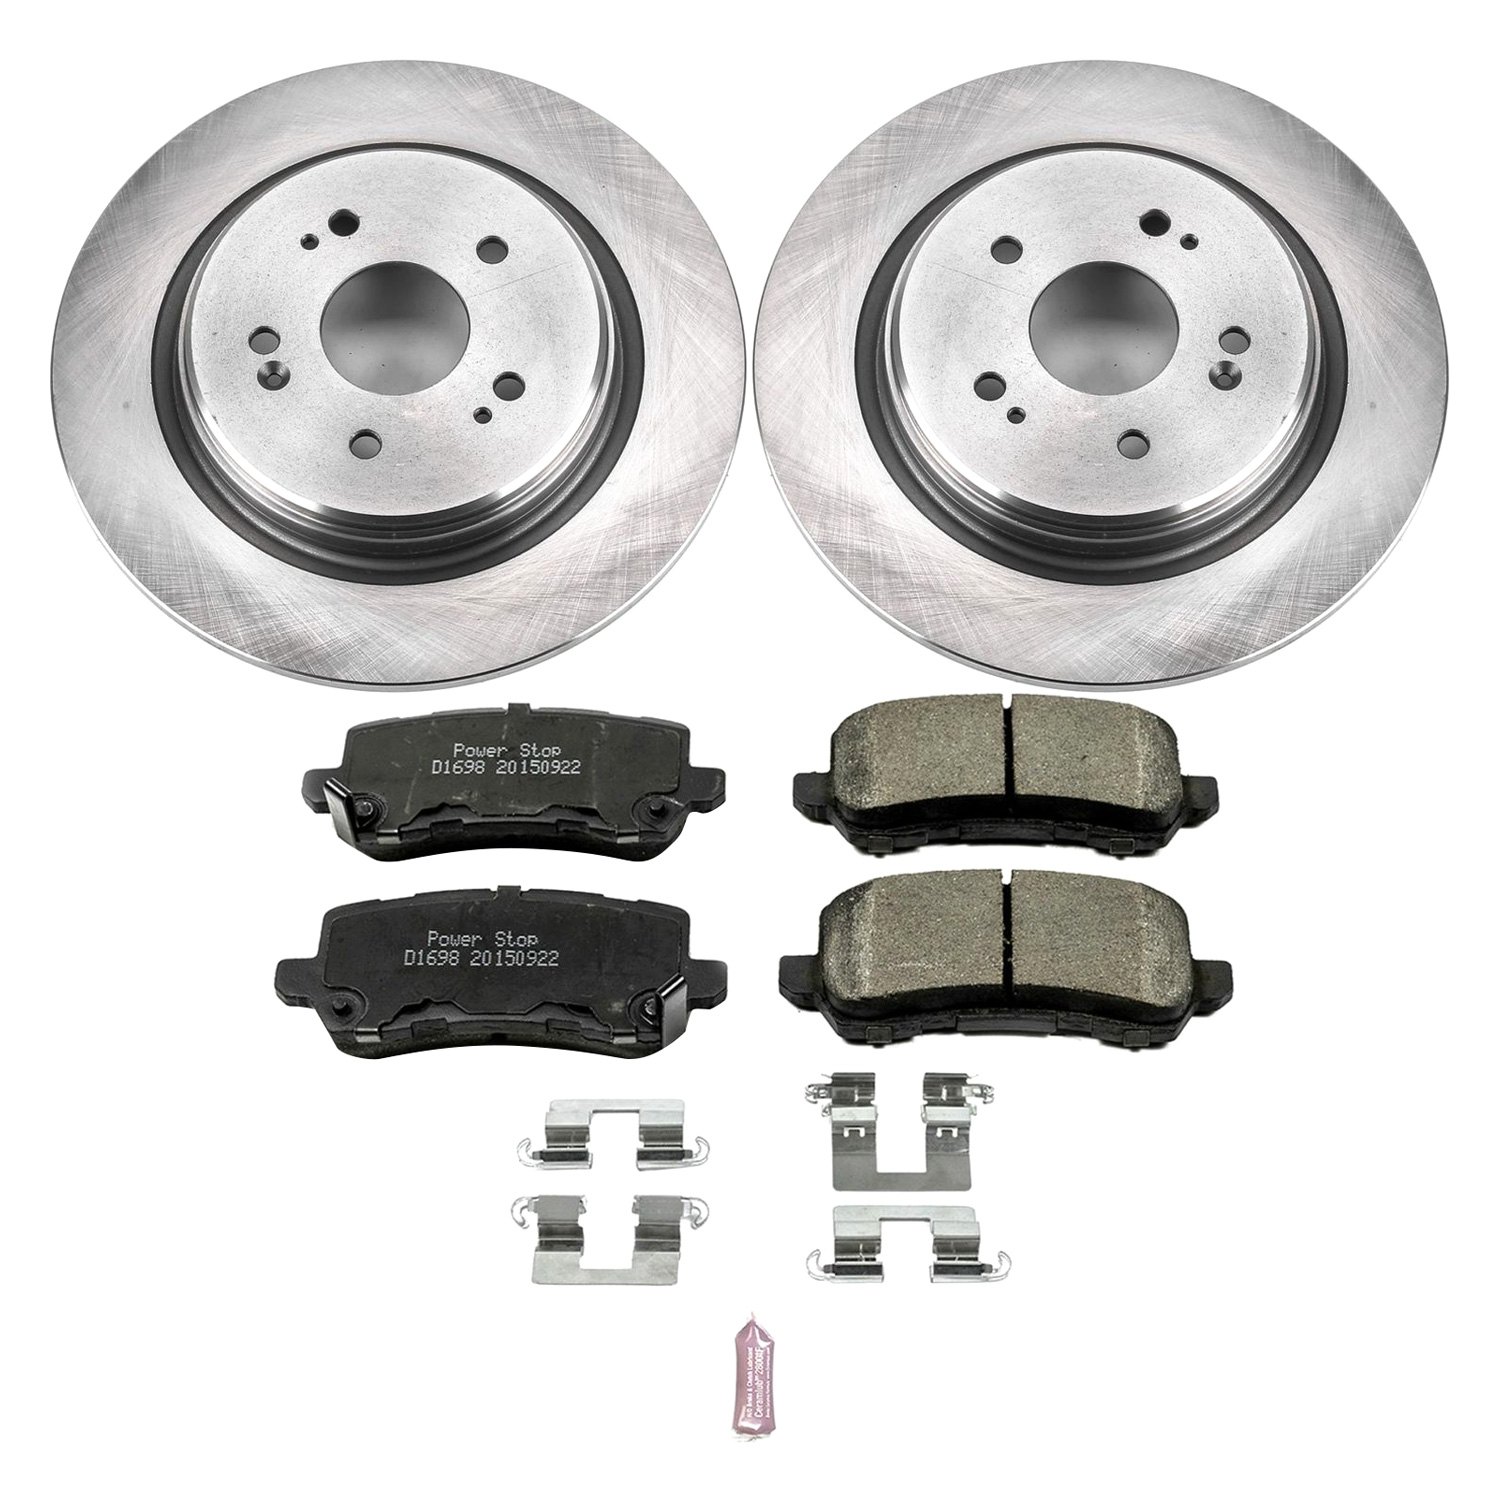 Ceramic Brake Pads Calipers Power Stop KCOE7214 Autospeciality Replacement Front Caliper Kit OE Rotors 